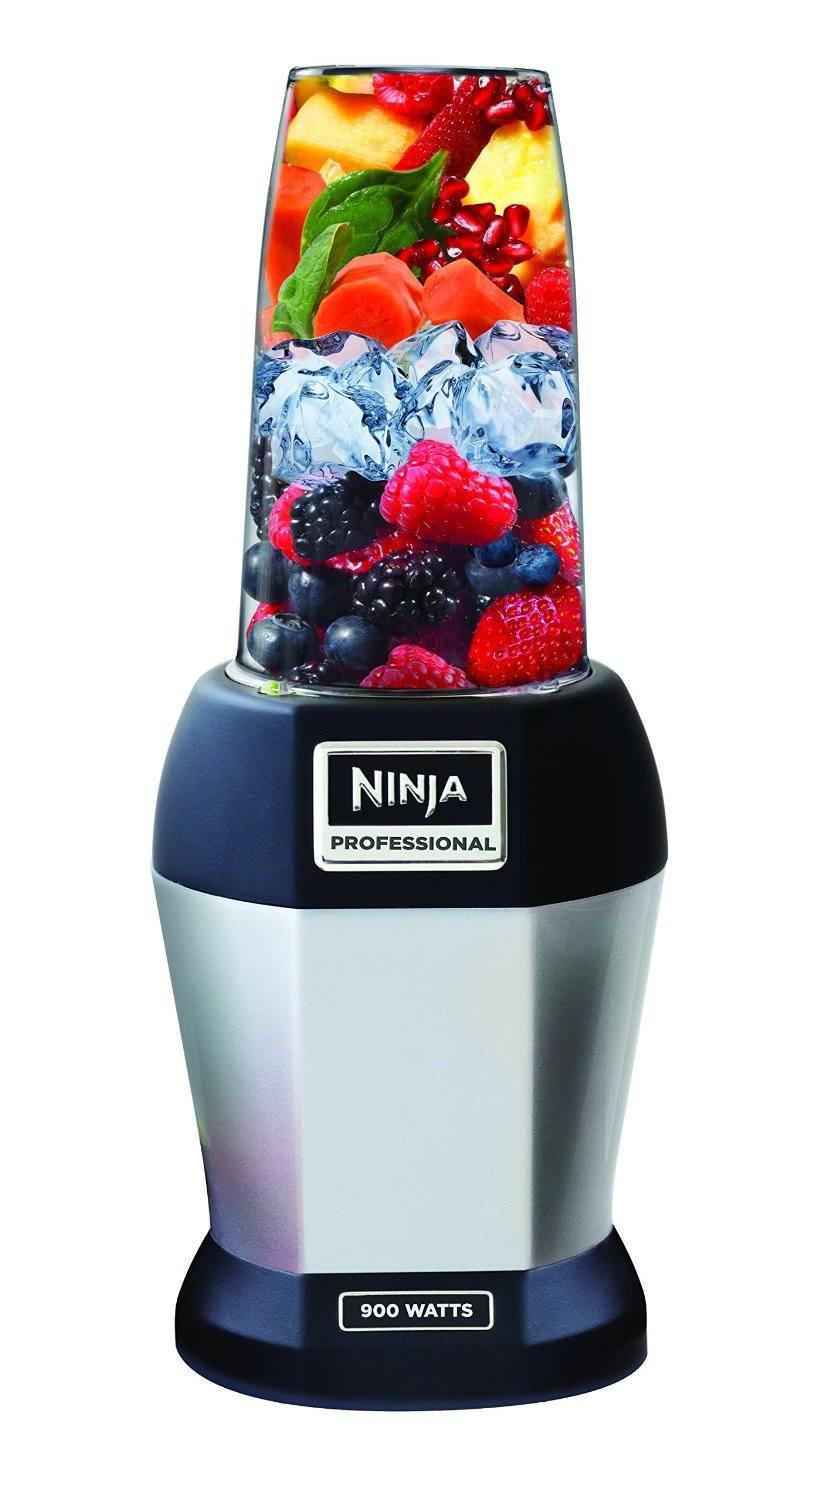 Best Blender For Smoothies And Ice
 What are the best blenders for crushing ice & frozen fruits